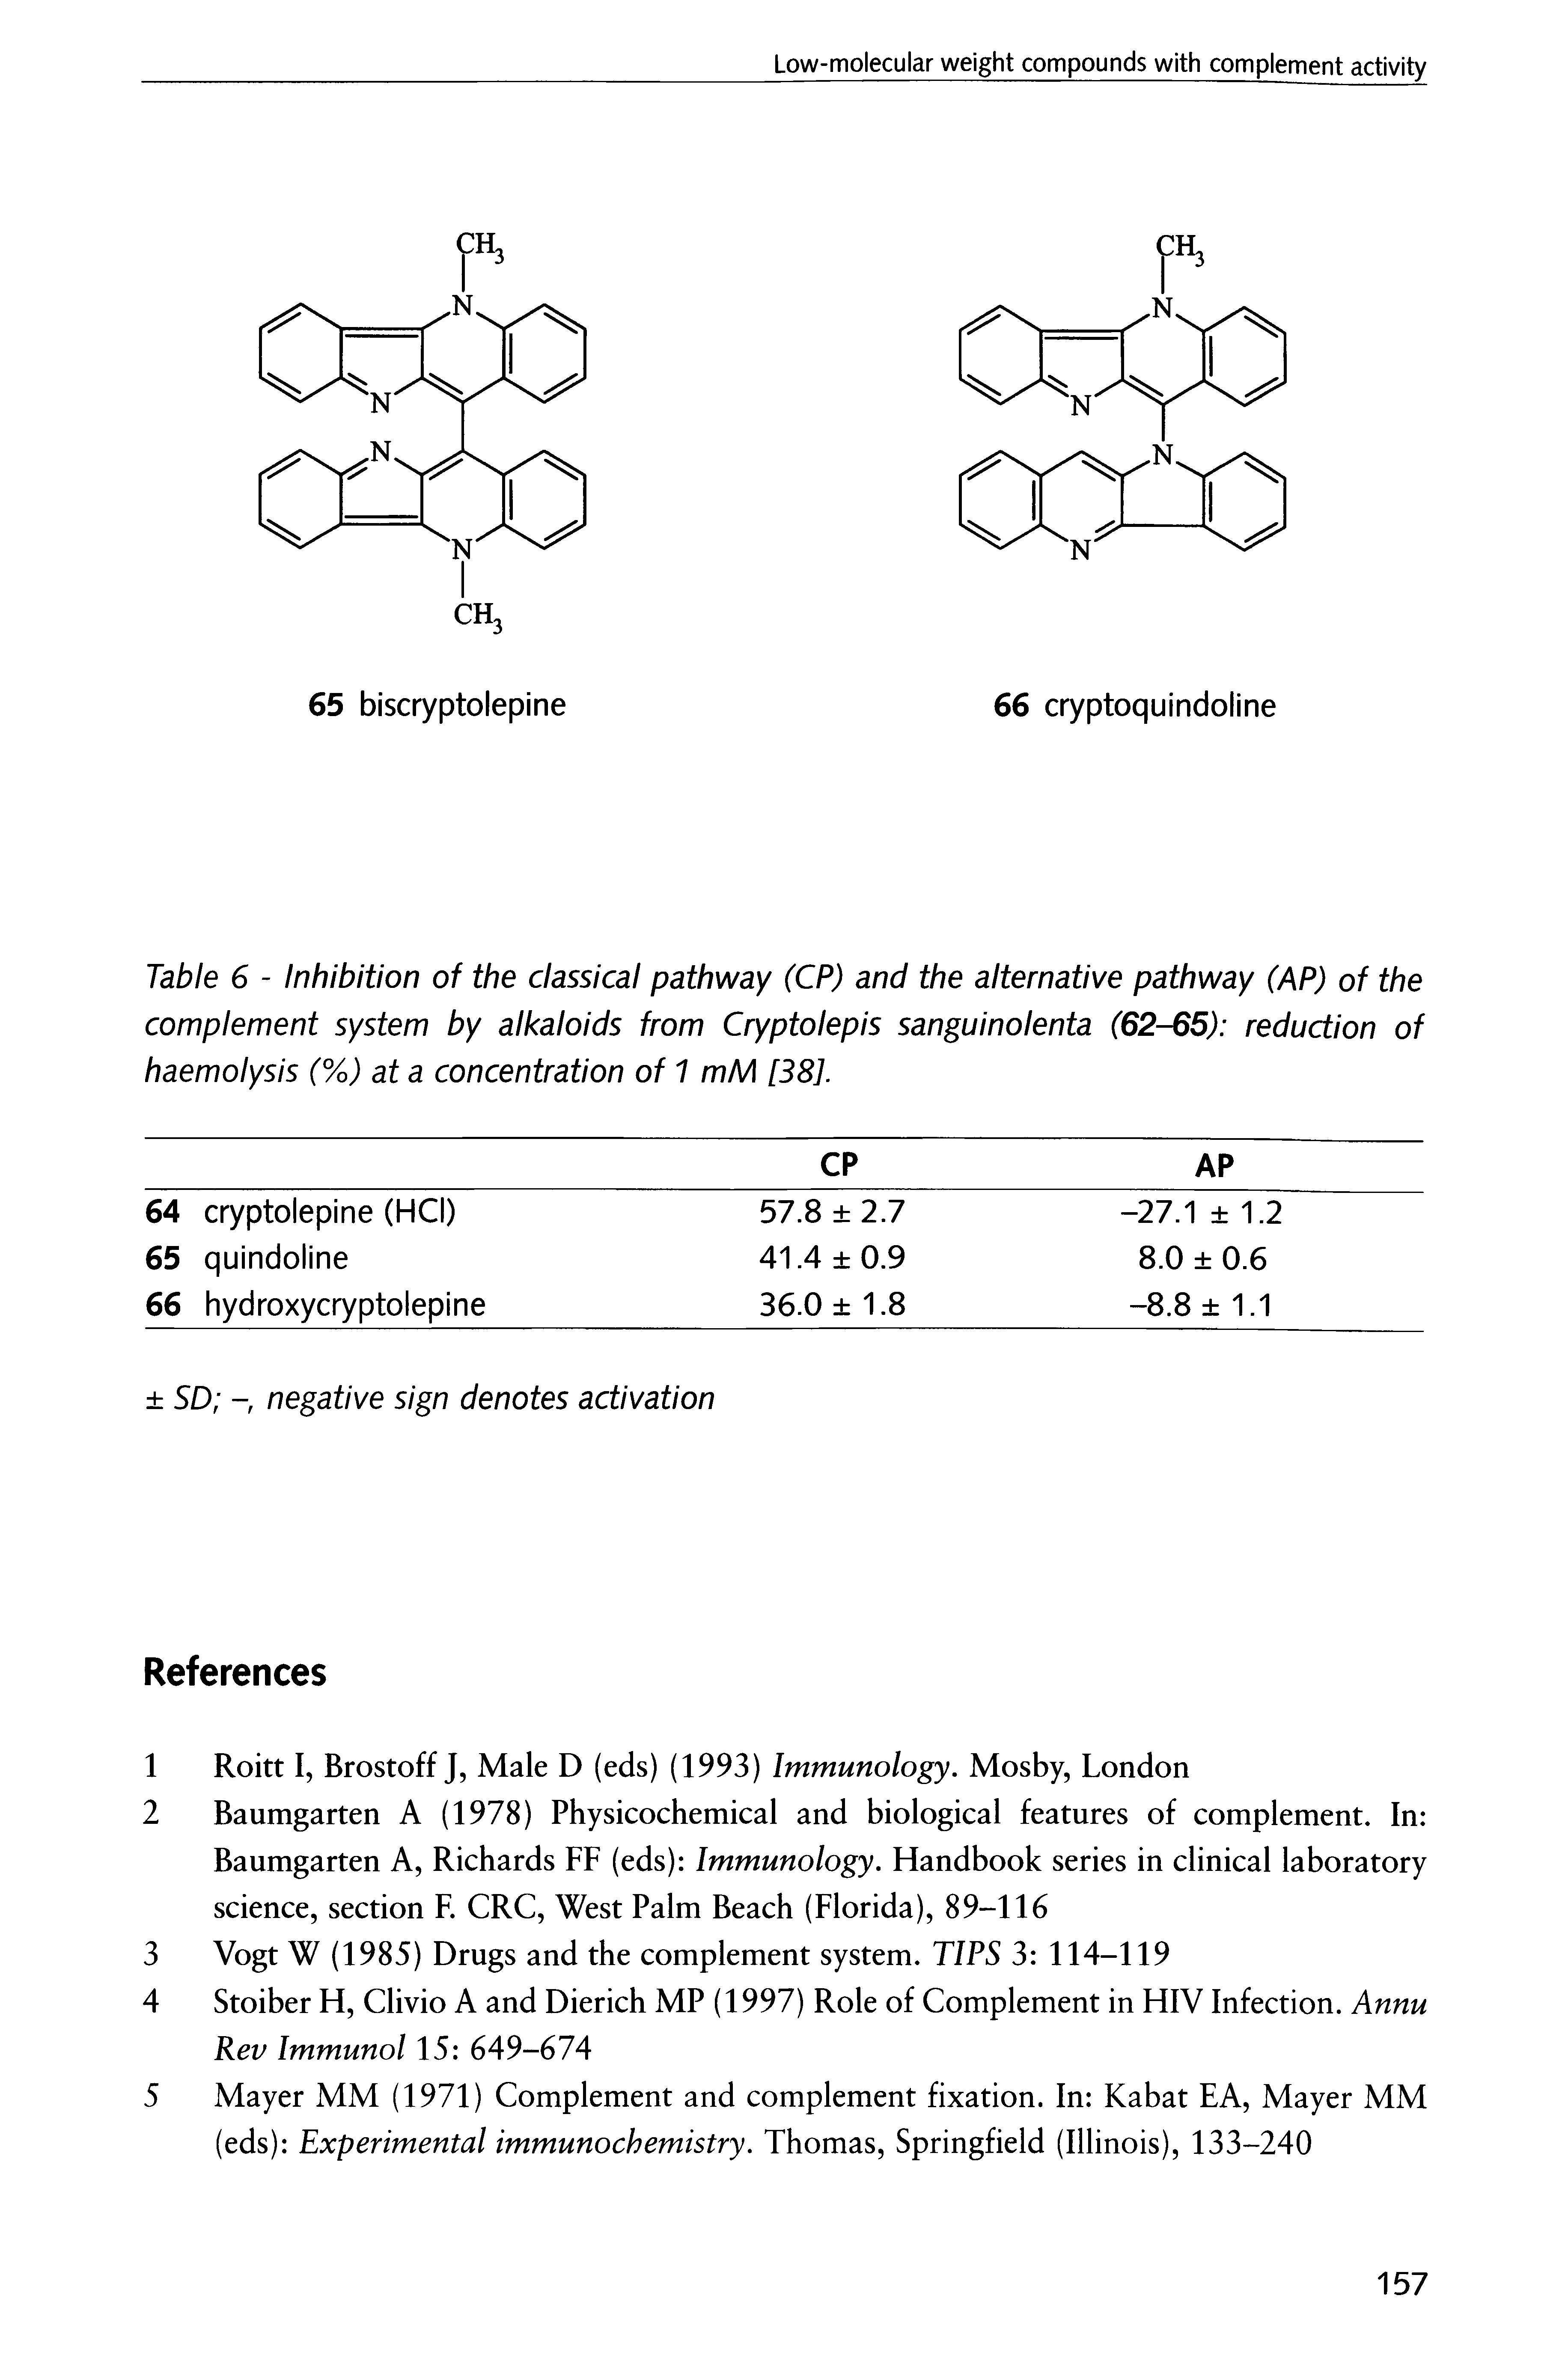 Table 6 - Inhibition of the classical pathway (CP) and the alternative pathway (AP) of the complement system by alkaloids from Cryptolepis sanguinolenta (62-65) reduction of haemolysis (%) at a concentration of 1 mM [38].